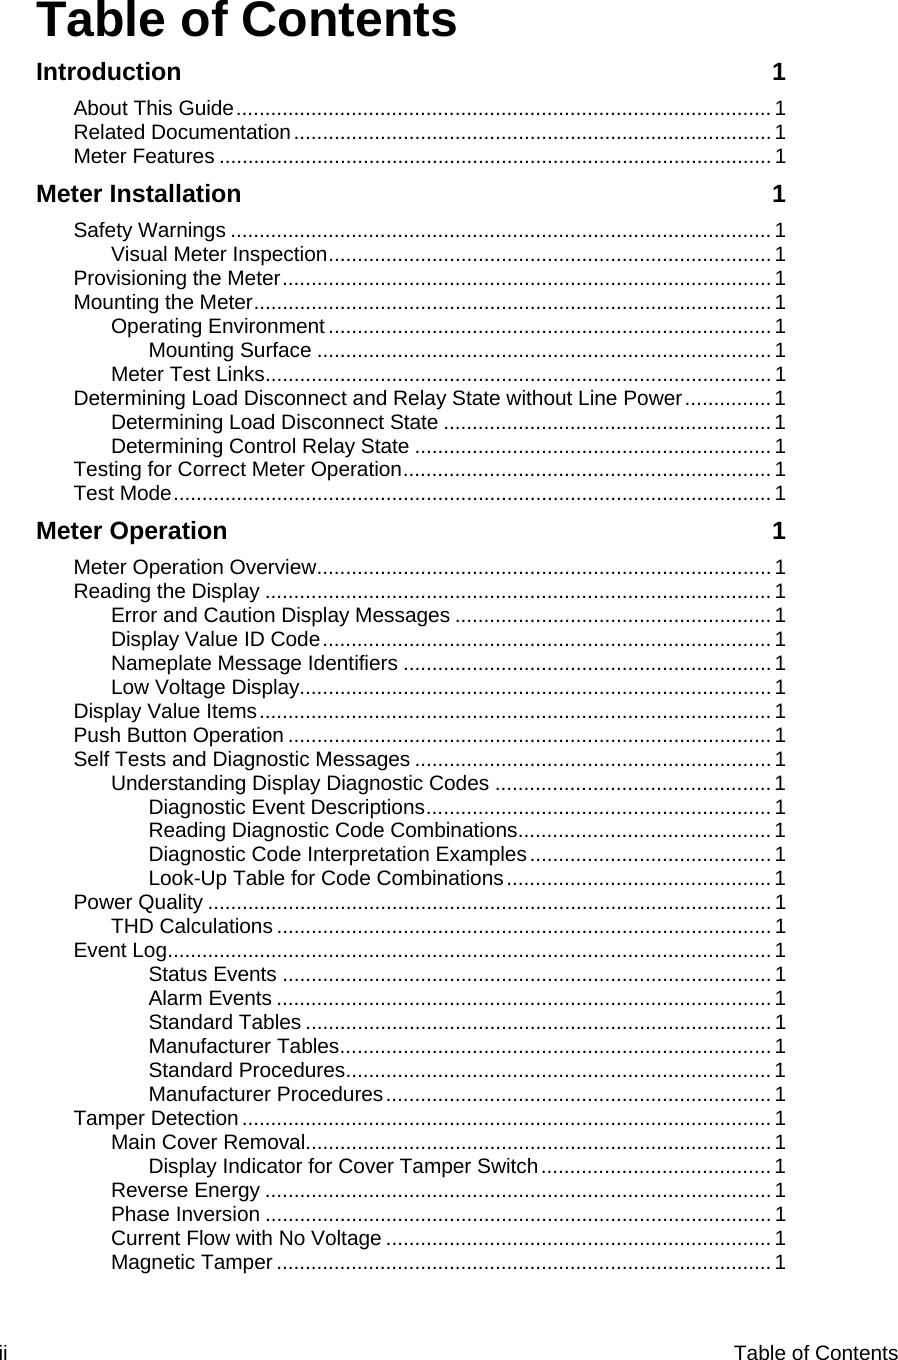 ii  Table of Contents    Table of Contents Introduction 1 About This Guide............................................................................................. 1 Related Documentation...................................................................................1 Meter Features ................................................................................................1 Meter Installation  1 Safety Warnings ..............................................................................................1 Visual Meter Inspection.............................................................................1 Provisioning the Meter..................................................................................... 1 Mounting the Meter..........................................................................................1 Operating Environment ............................................................................. 1 Mounting Surface ...............................................................................1 Meter Test Links........................................................................................ 1 Determining Load Disconnect and Relay State without Line Power............... 1 Determining Load Disconnect State ......................................................... 1 Determining Control Relay State ..............................................................1 Testing for Correct Meter Operation................................................................ 1 Test Mode........................................................................................................ 1 Meter Operation  1 Meter Operation Overview............................................................................... 1 Reading the Display ........................................................................................1 Error and Caution Display Messages .......................................................1 Display Value ID Code.............................................................................. 1 Nameplate Message Identifiers ................................................................1 Low Voltage Display..................................................................................1 Display Value Items......................................................................................... 1 Push Button Operation ....................................................................................1 Self Tests and Diagnostic Messages .............................................................. 1 Understanding Display Diagnostic Codes ................................................1 Diagnostic Event Descriptions............................................................ 1 Reading Diagnostic Code Combinations............................................ 1 Diagnostic Code Interpretation Examples.......................................... 1 Look-Up Table for Code Combinations..............................................1 Power Quality ..................................................................................................1 THD Calculations ...................................................................................... 1 Event Log......................................................................................................... 1 Status Events .....................................................................................1 Alarm Events ......................................................................................1 Standard Tables .................................................................................1 Manufacturer Tables........................................................................... 1 Standard Procedures.......................................................................... 1 Manufacturer Procedures...................................................................1 Tamper Detection............................................................................................ 1 Main Cover Removal.................................................................................1 Display Indicator for Cover Tamper Switch........................................1 Reverse Energy ........................................................................................1 Phase Inversion ........................................................................................1 Current Flow with No Voltage ...................................................................1 Magnetic Tamper ...................................................................................... 1 